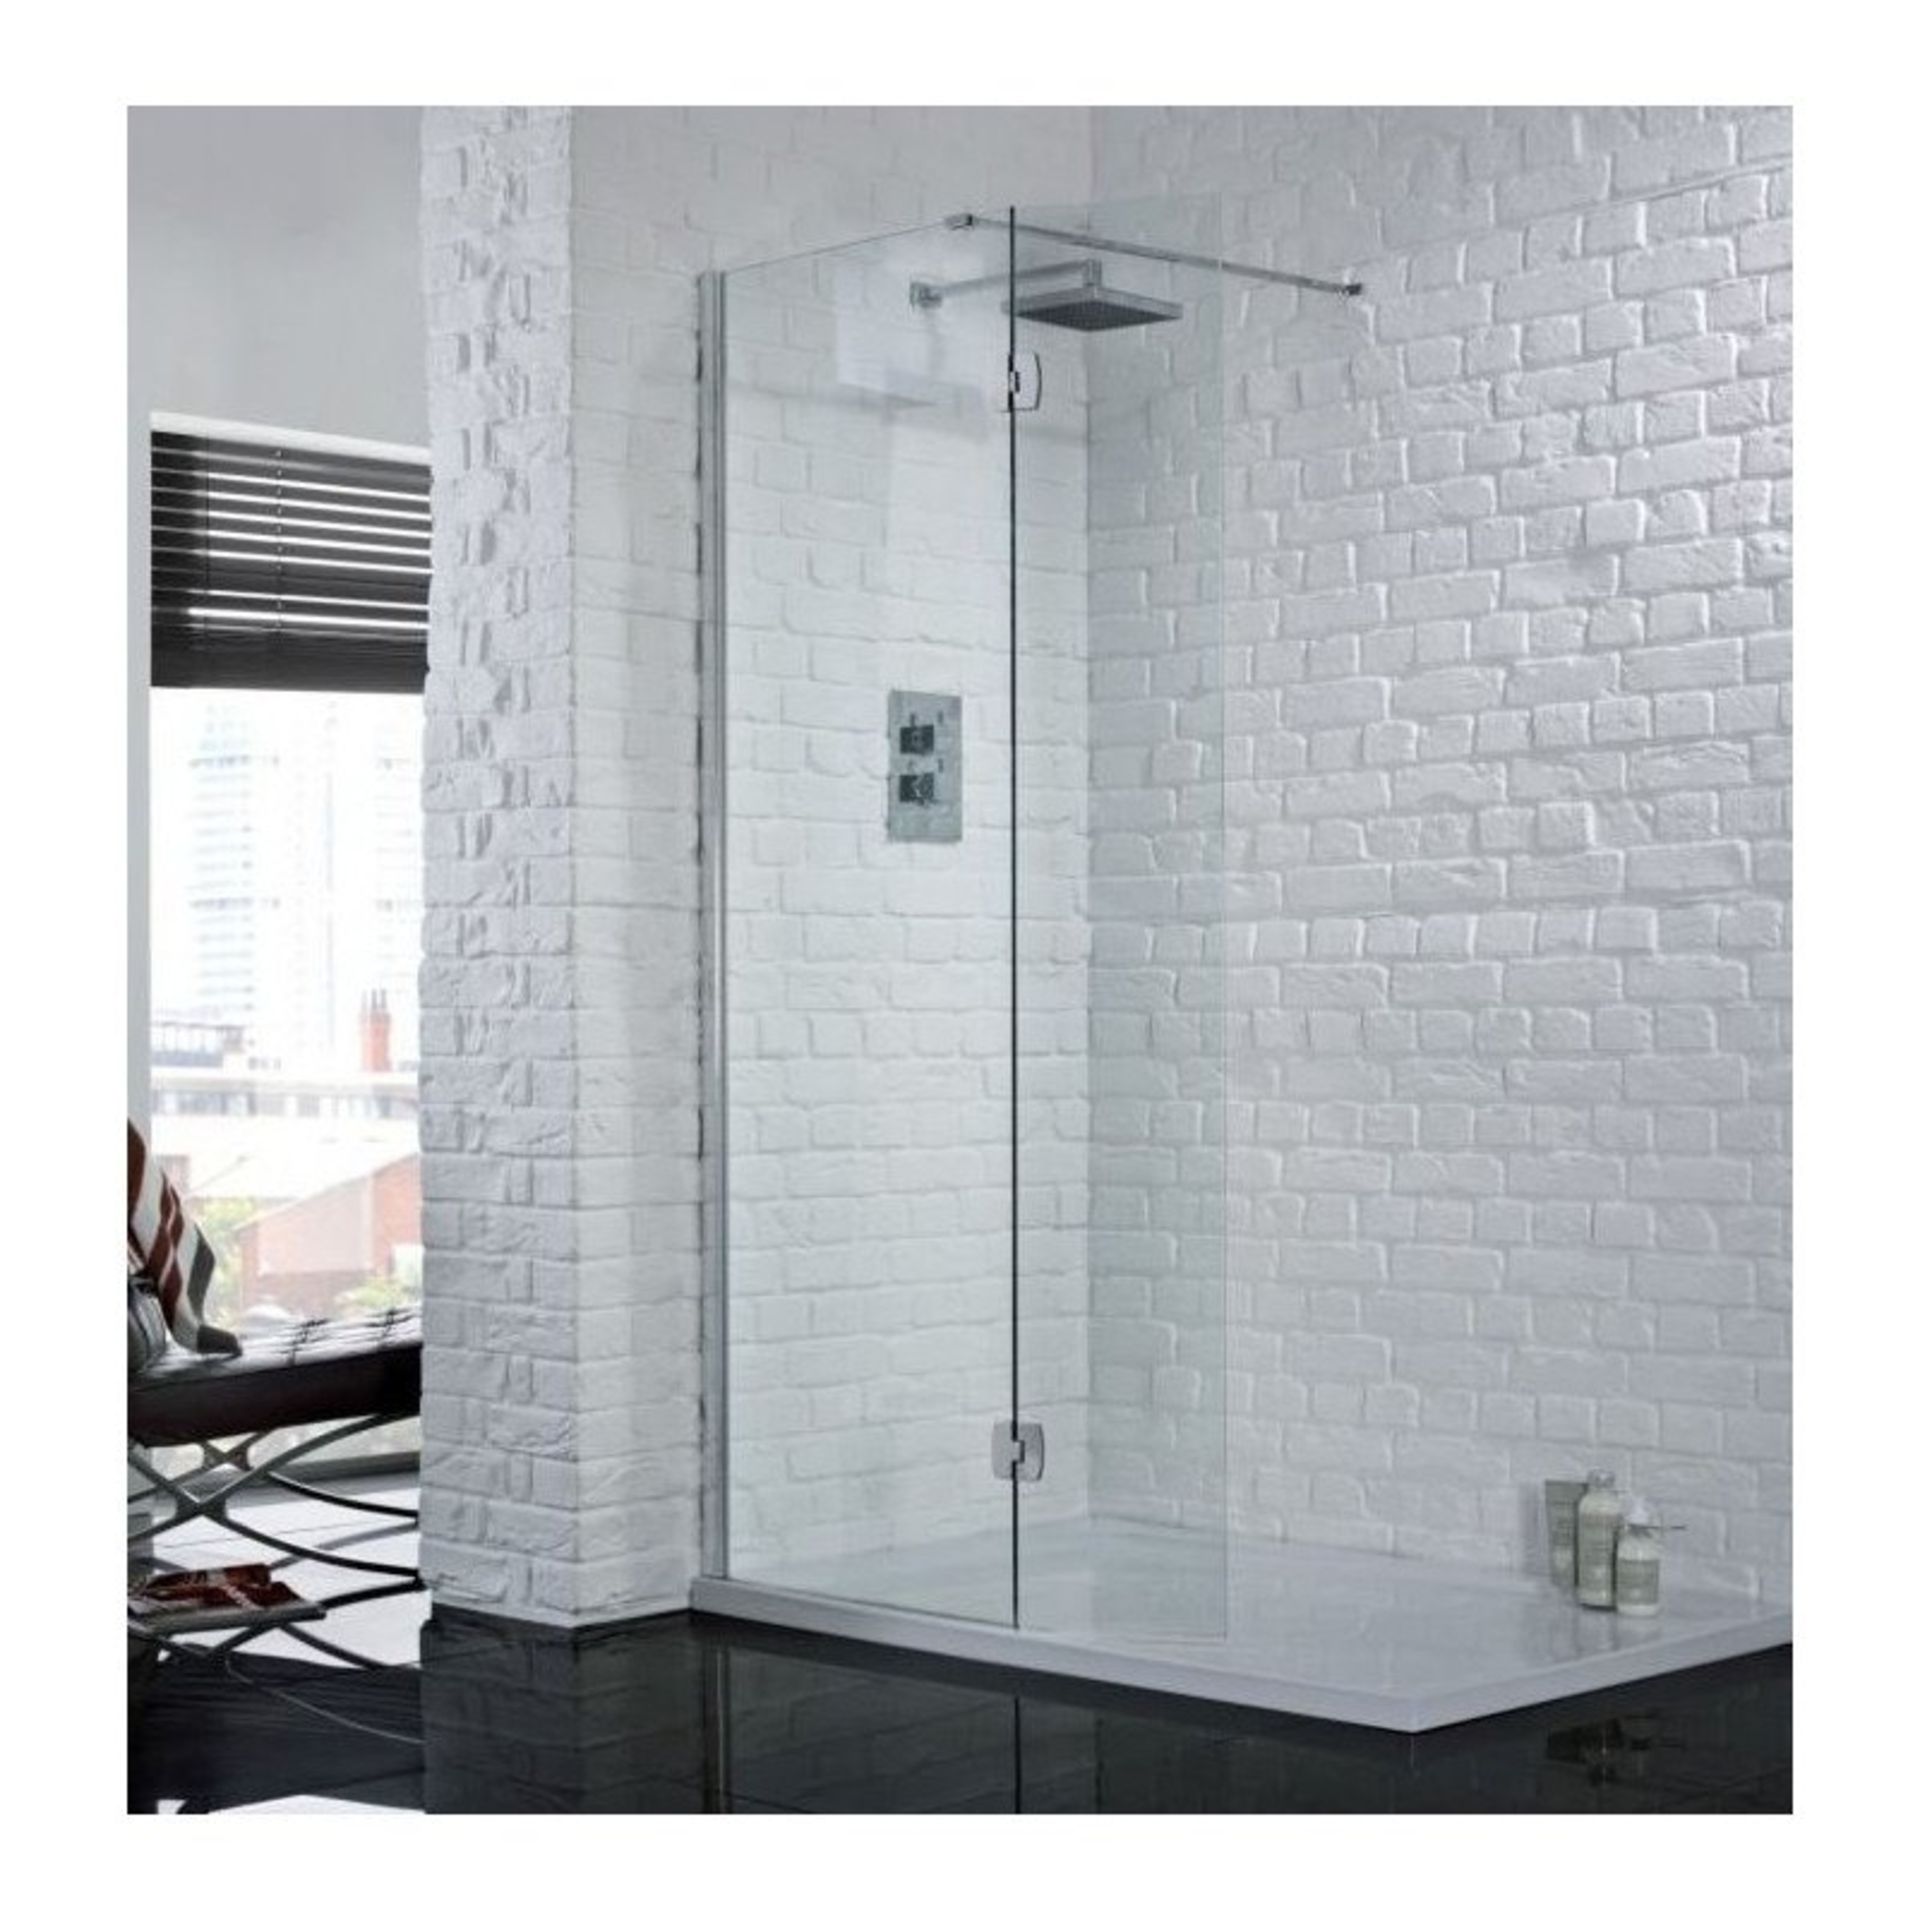 (SUP60) New 900x300mm - 8mm - Premium EasyClean Wetroom and rotatable panel.Rrp £399.99.8mm - Image 2 of 3